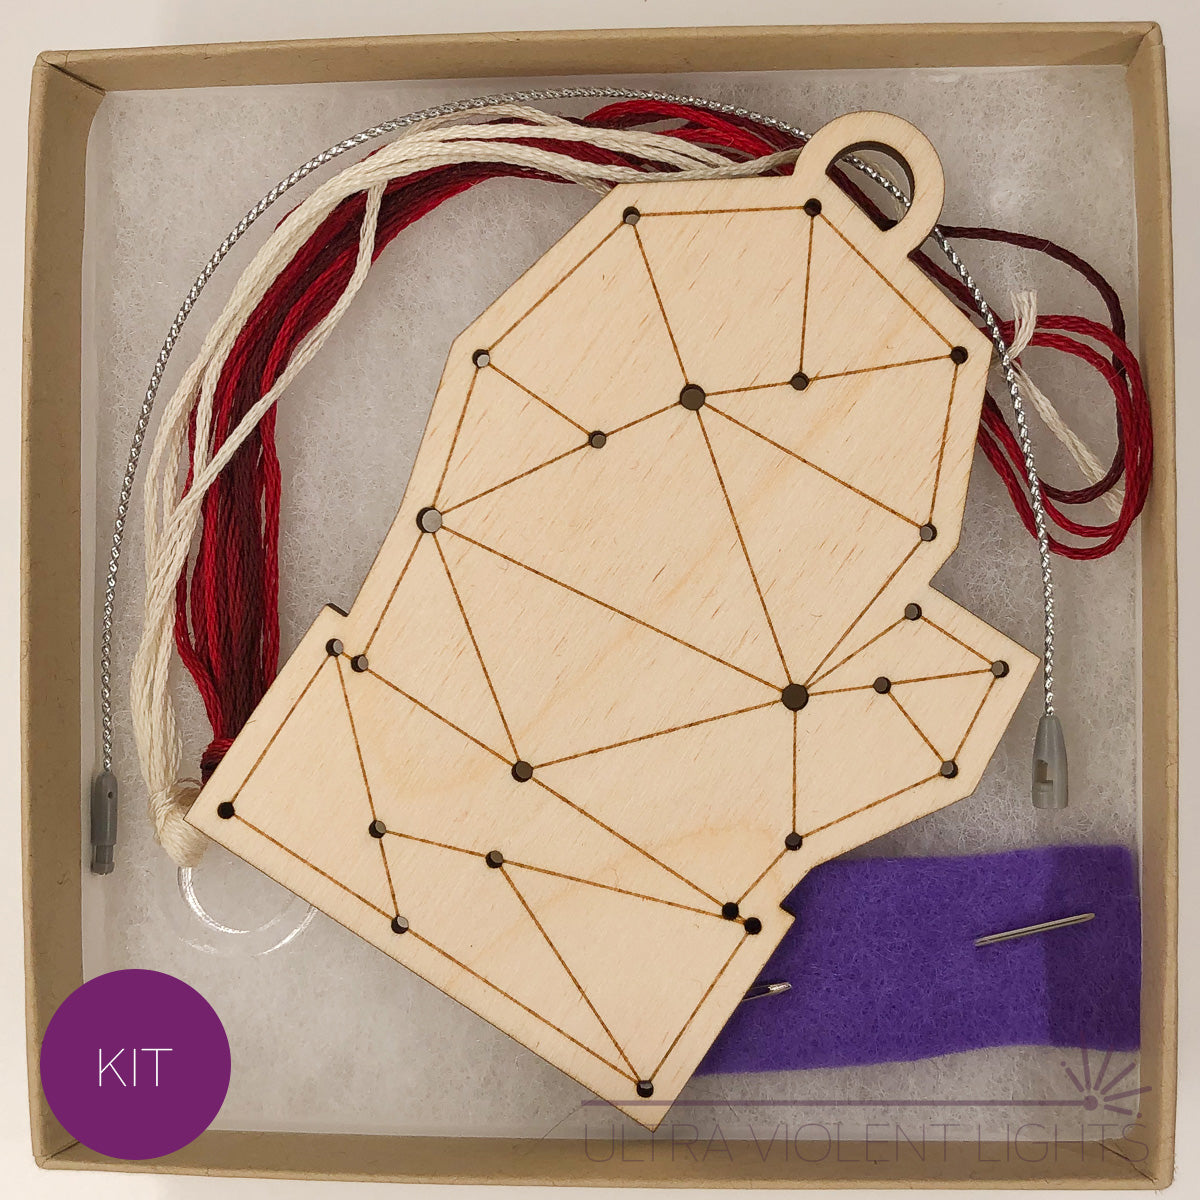 A mitten wooden embroidery kit with floss and a needle in a box